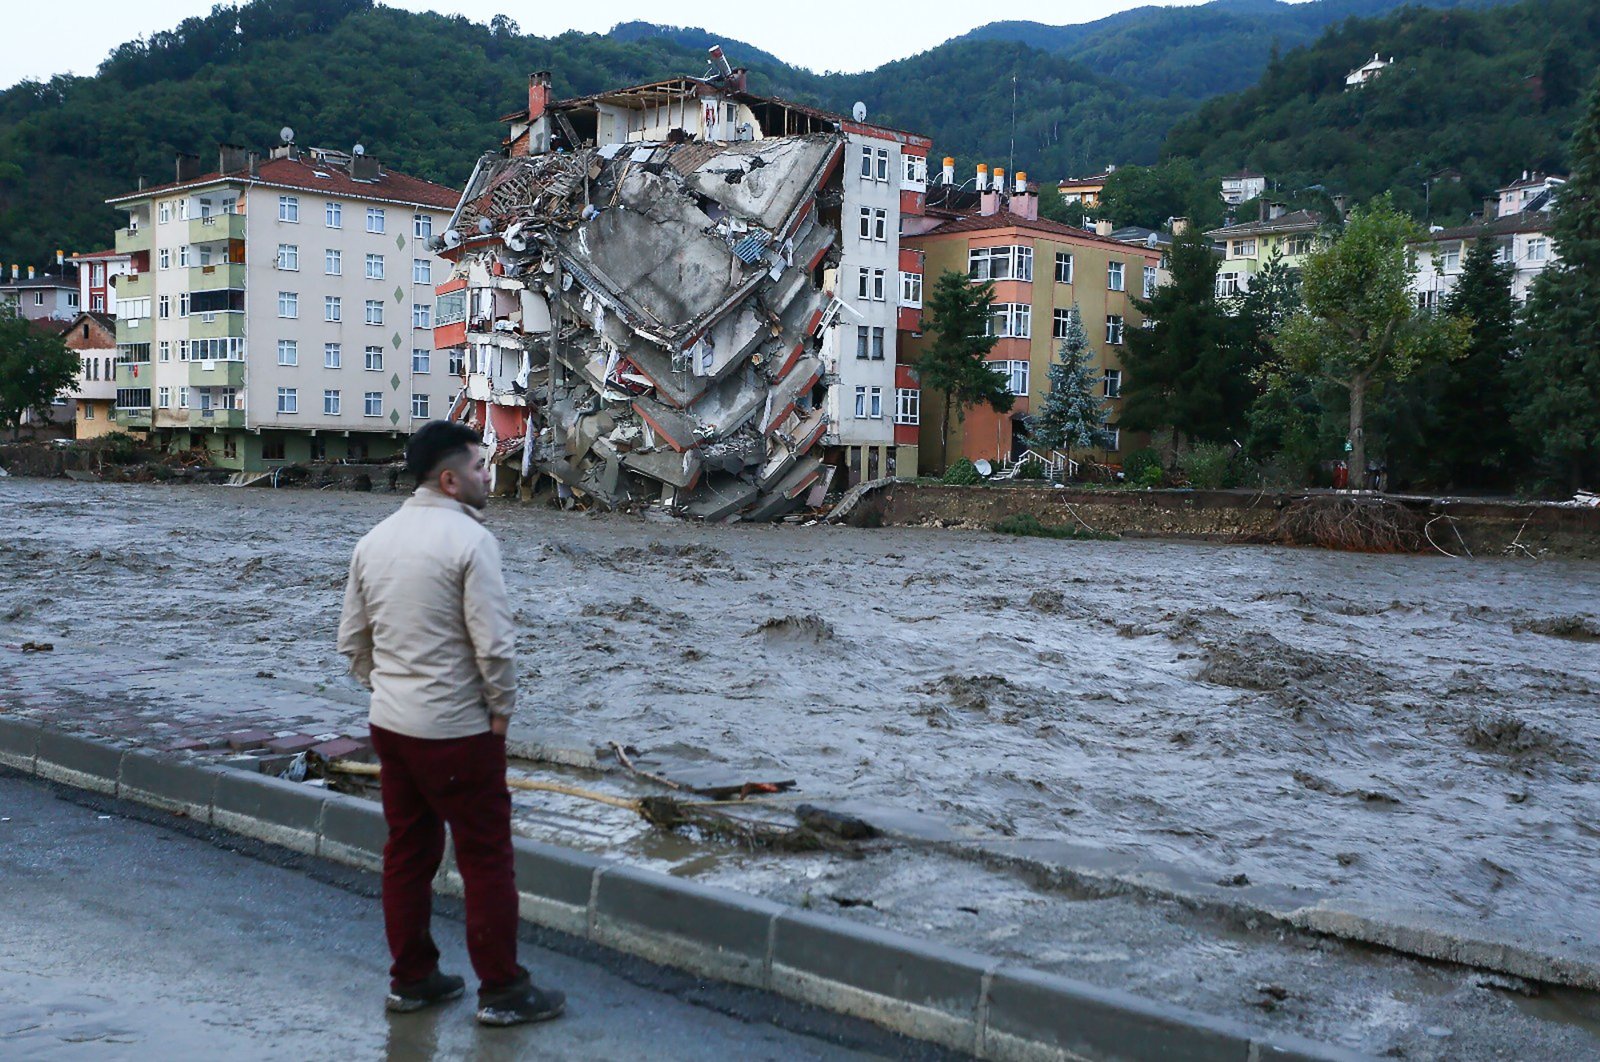 A man looks at the raging waters of the stream against the backdrop of a collapsed building in Bozkurt district, in Kastamonu, Turkey, Aug. 12, 2021. (İHA PHOTO)